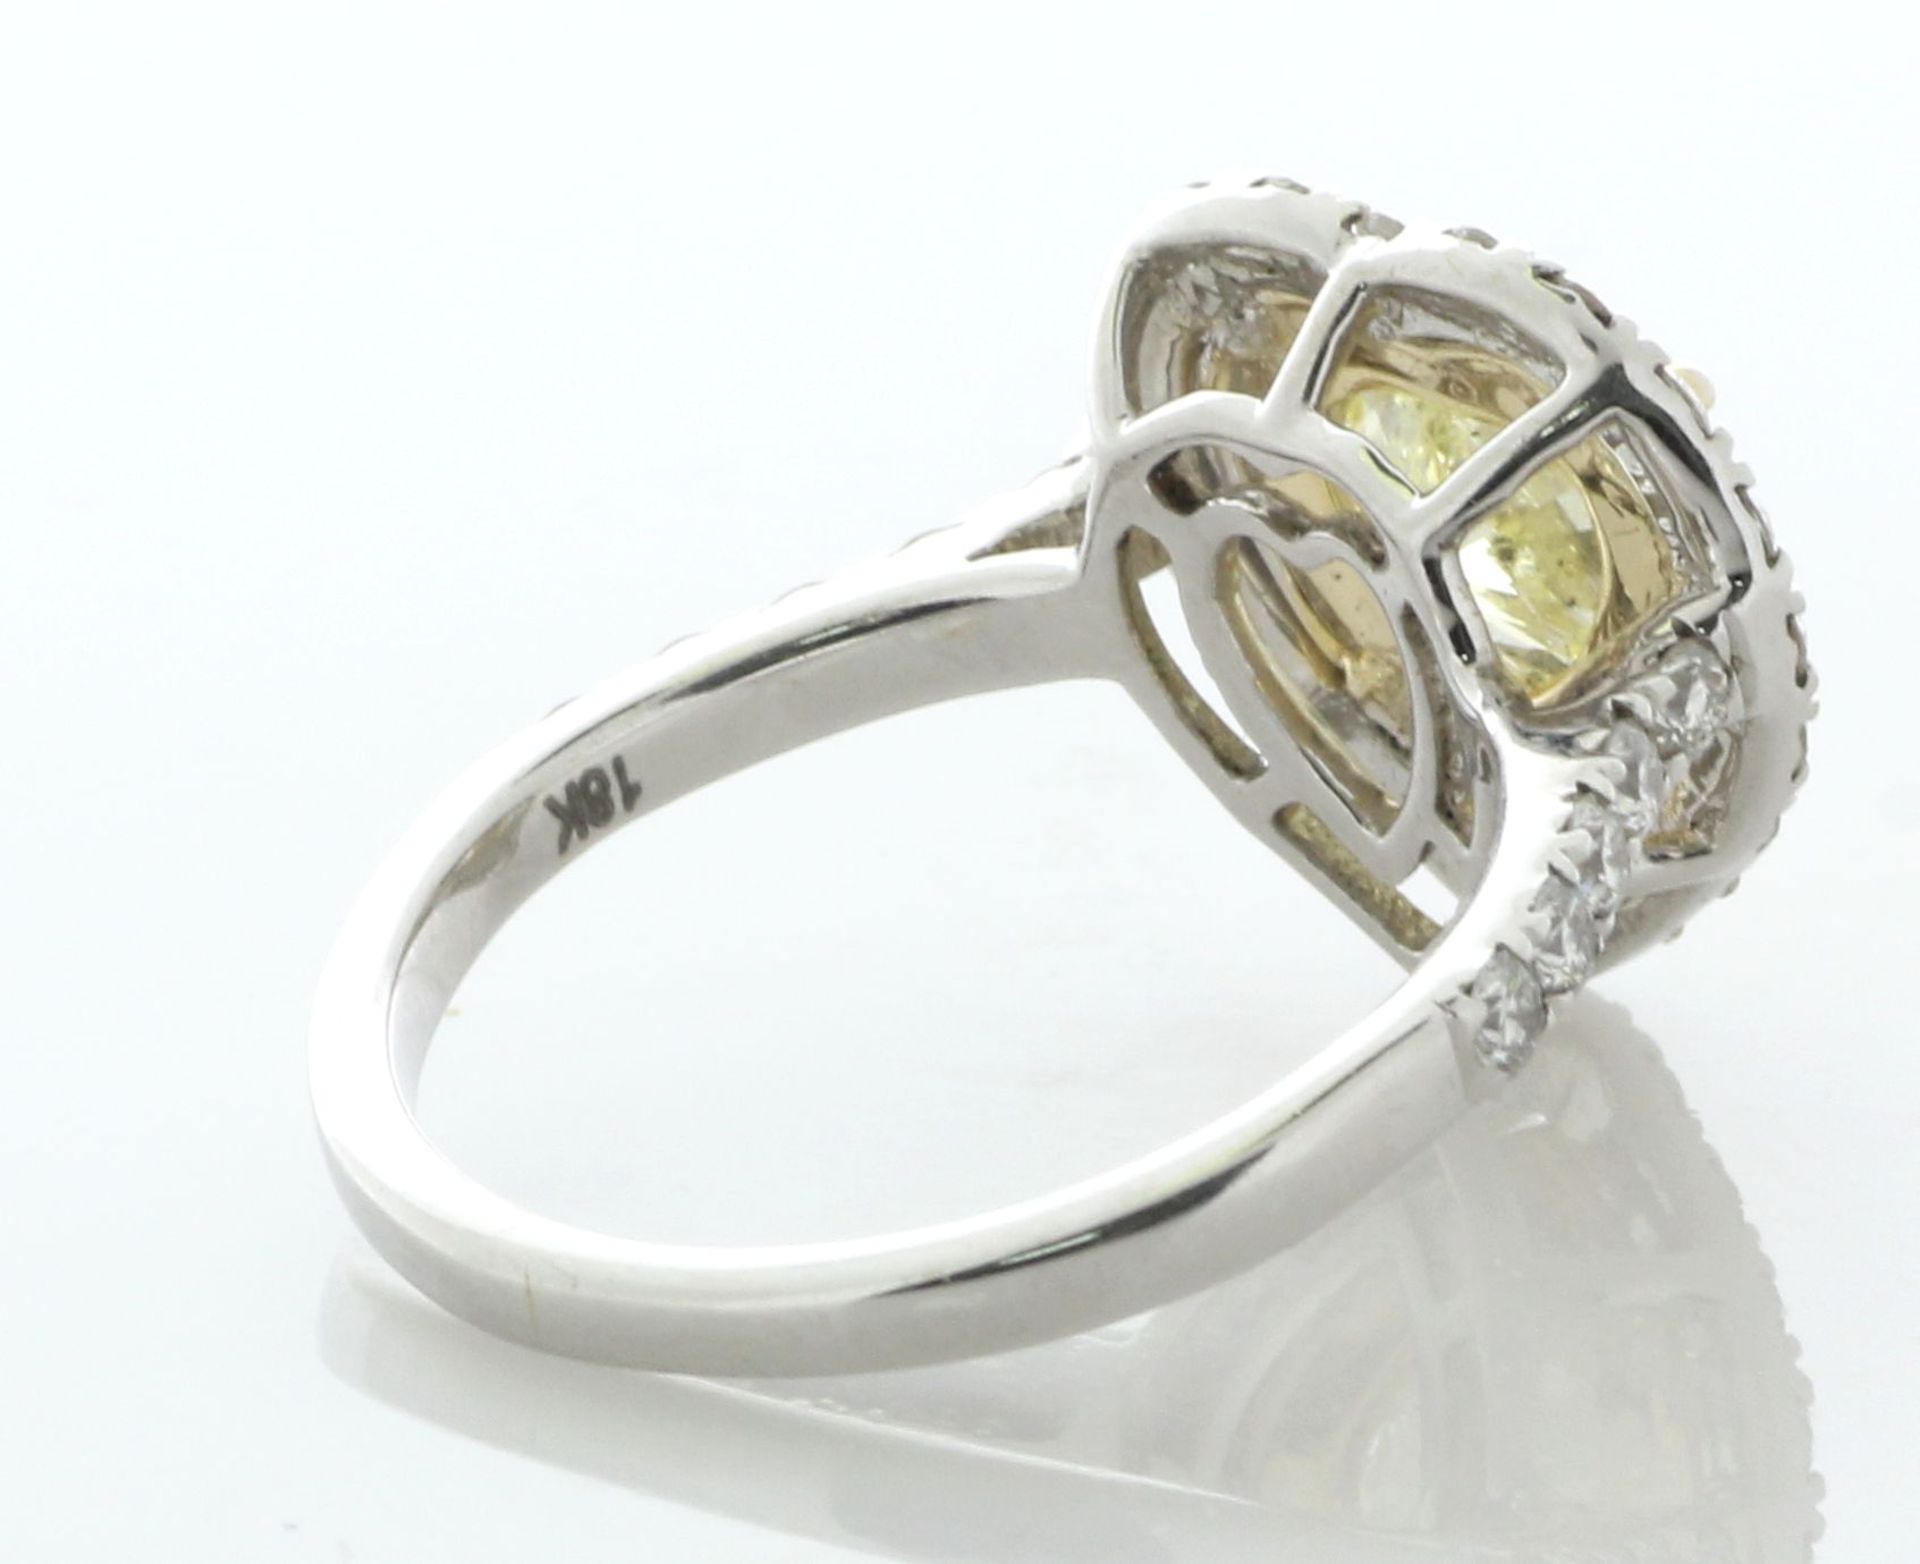 18ct White Gold Heart Shaped Cluster Diamond Ring (1.04) 1.79 Carats - Valued By AGI £17,400.00 - - Image 4 of 6